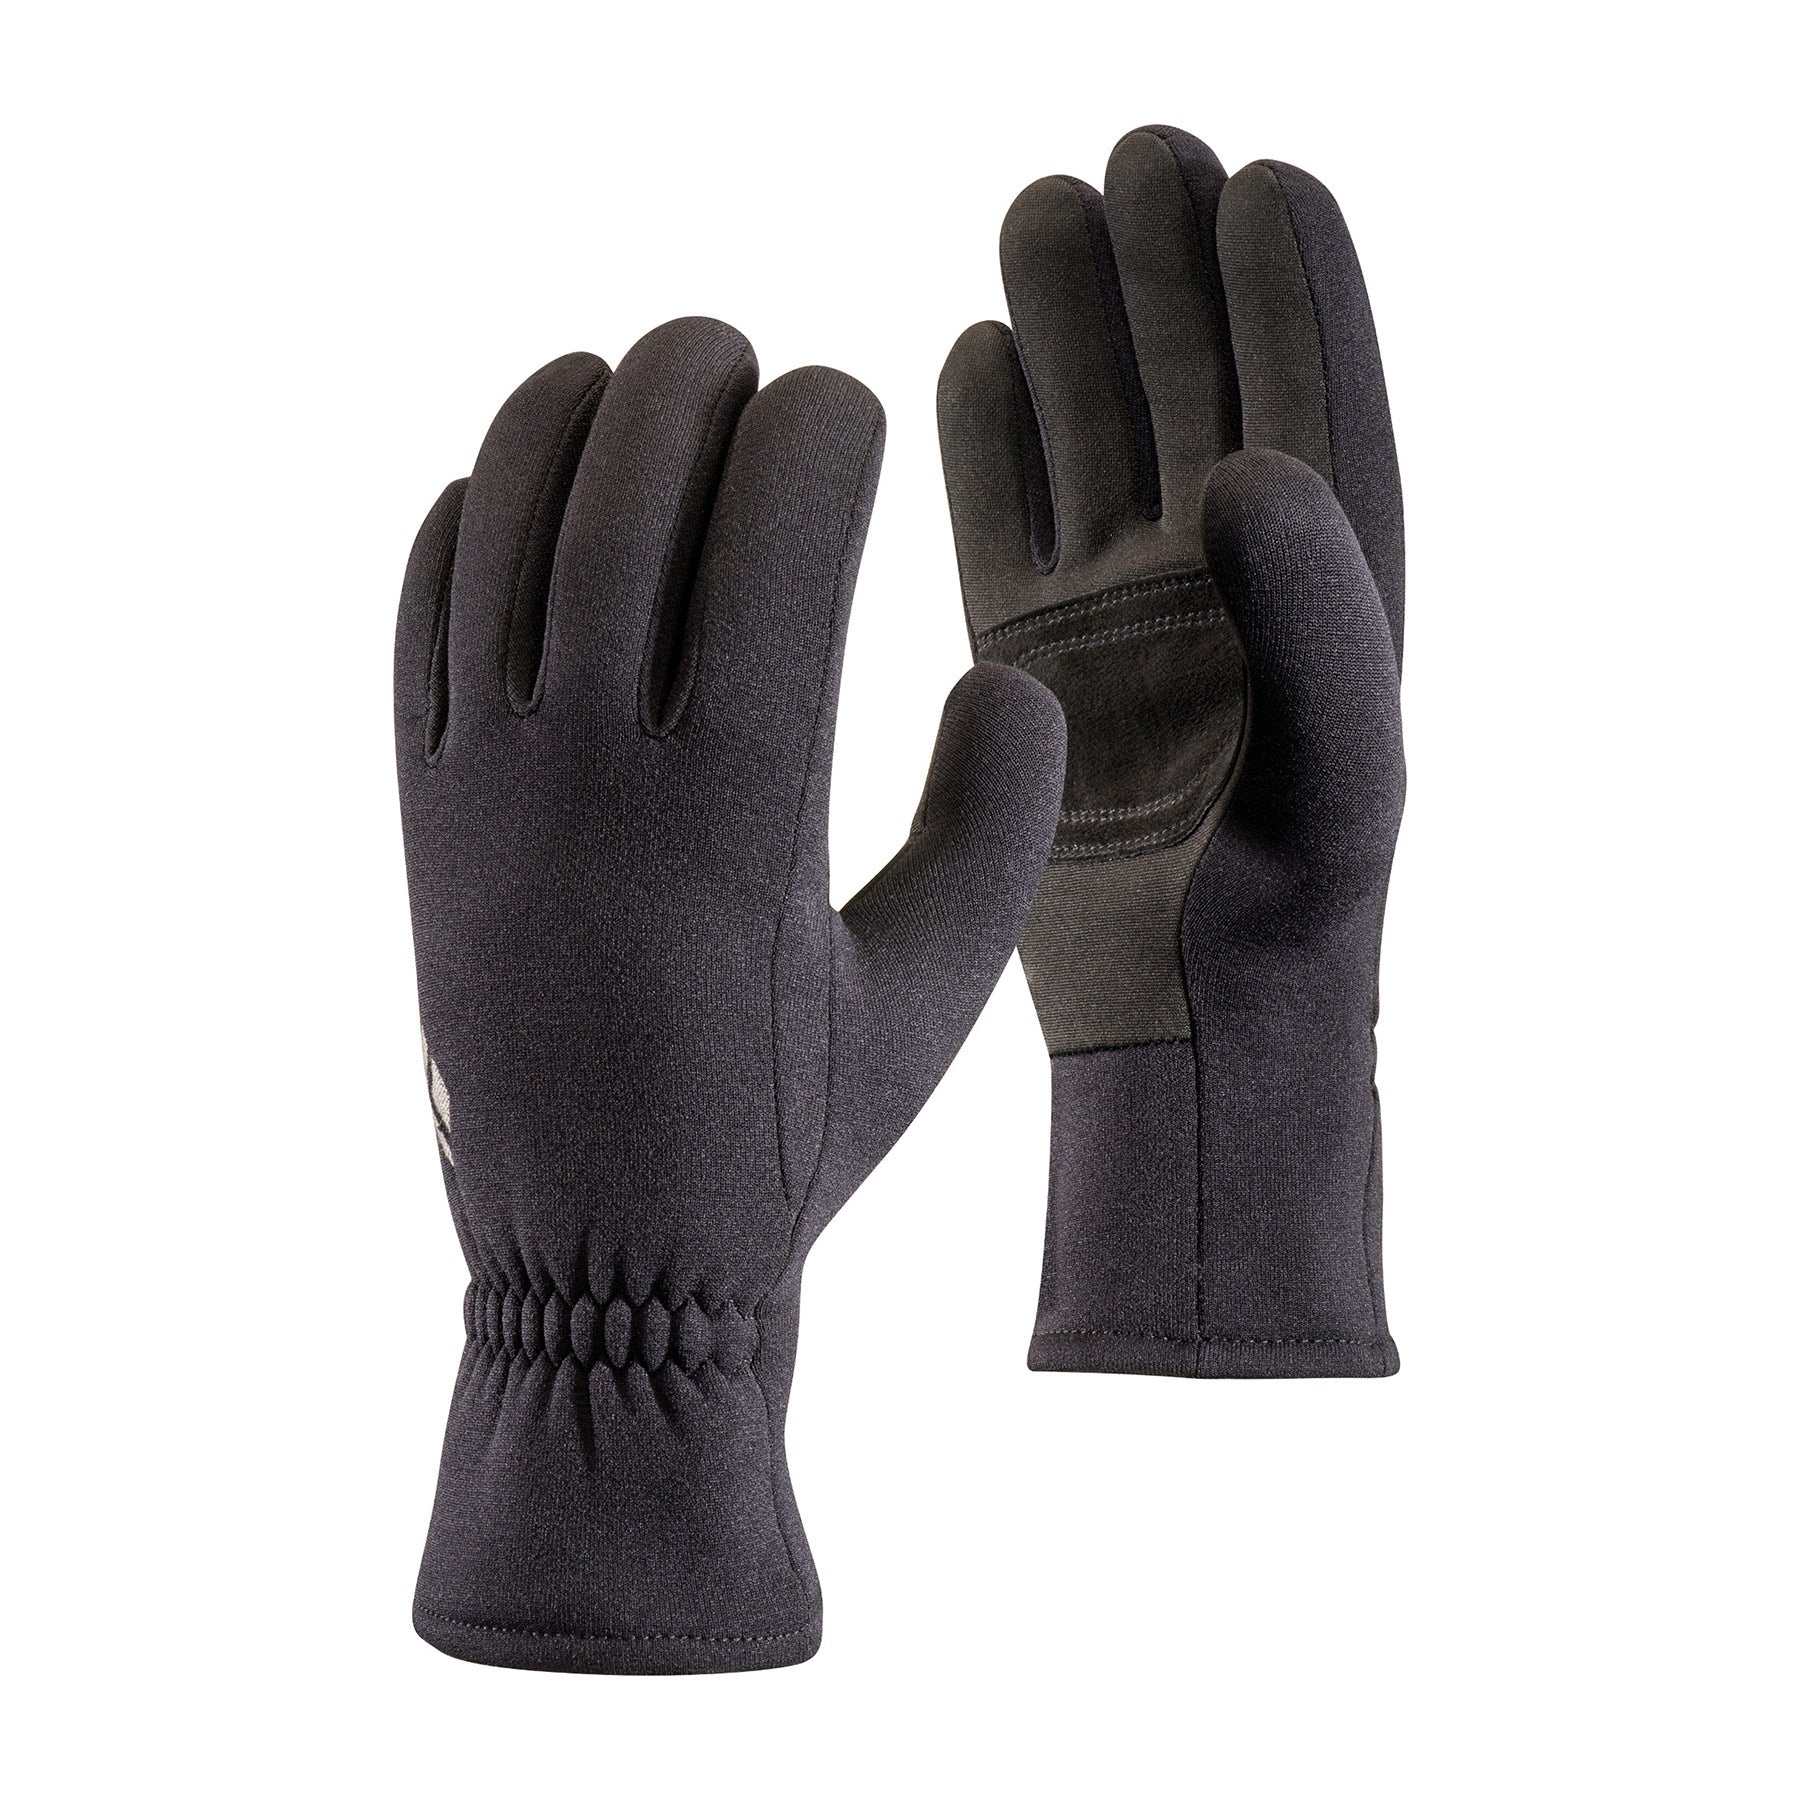 a pair of midweight liner gloves